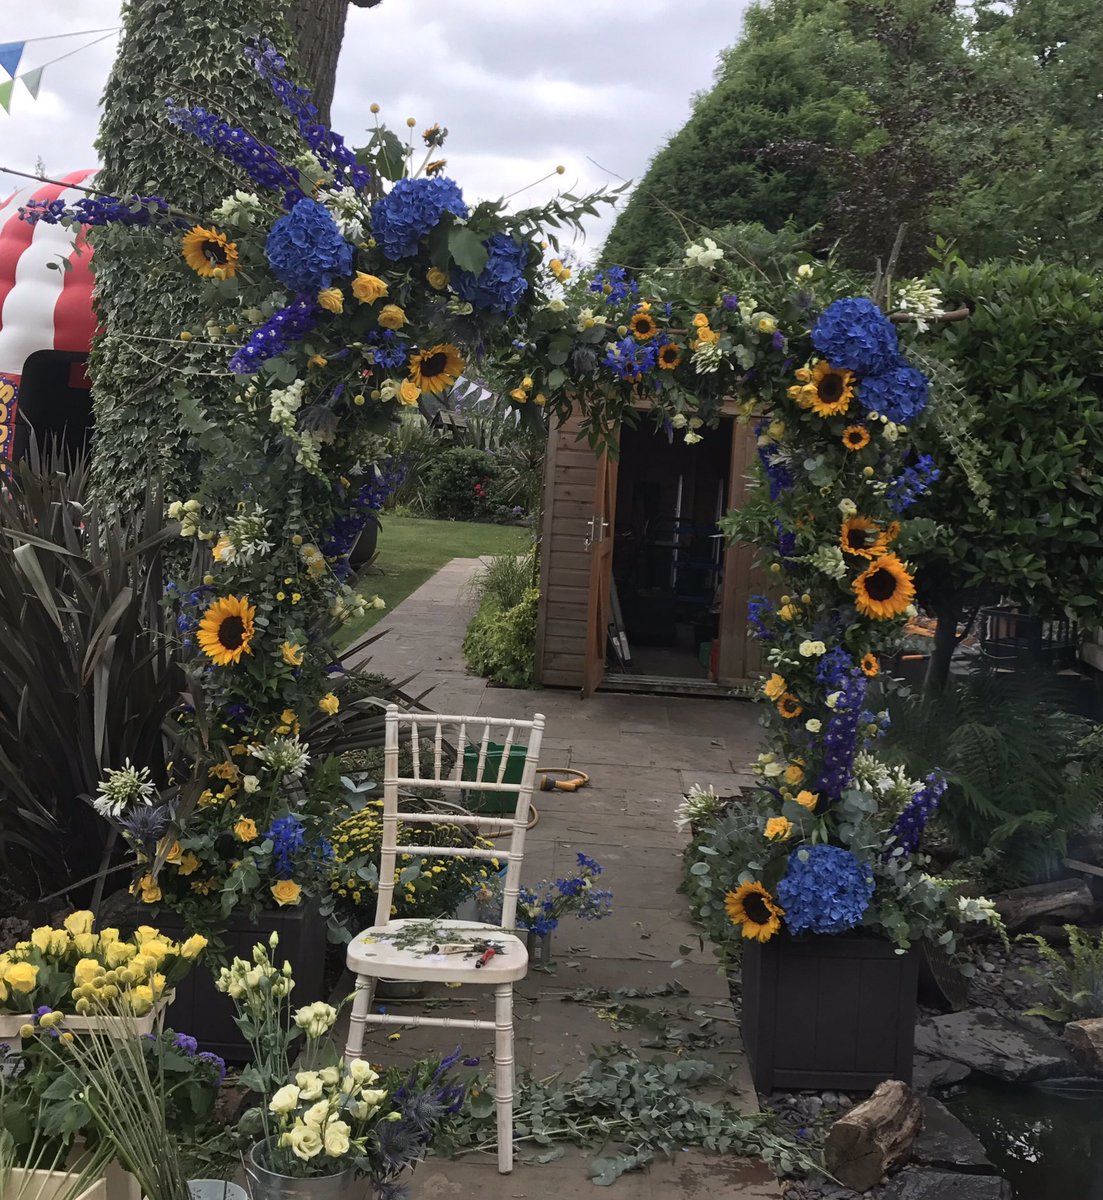 Nearly there! @MyrtleandSmith &a I putting together our first #floralarch for a very special young lady's 21st